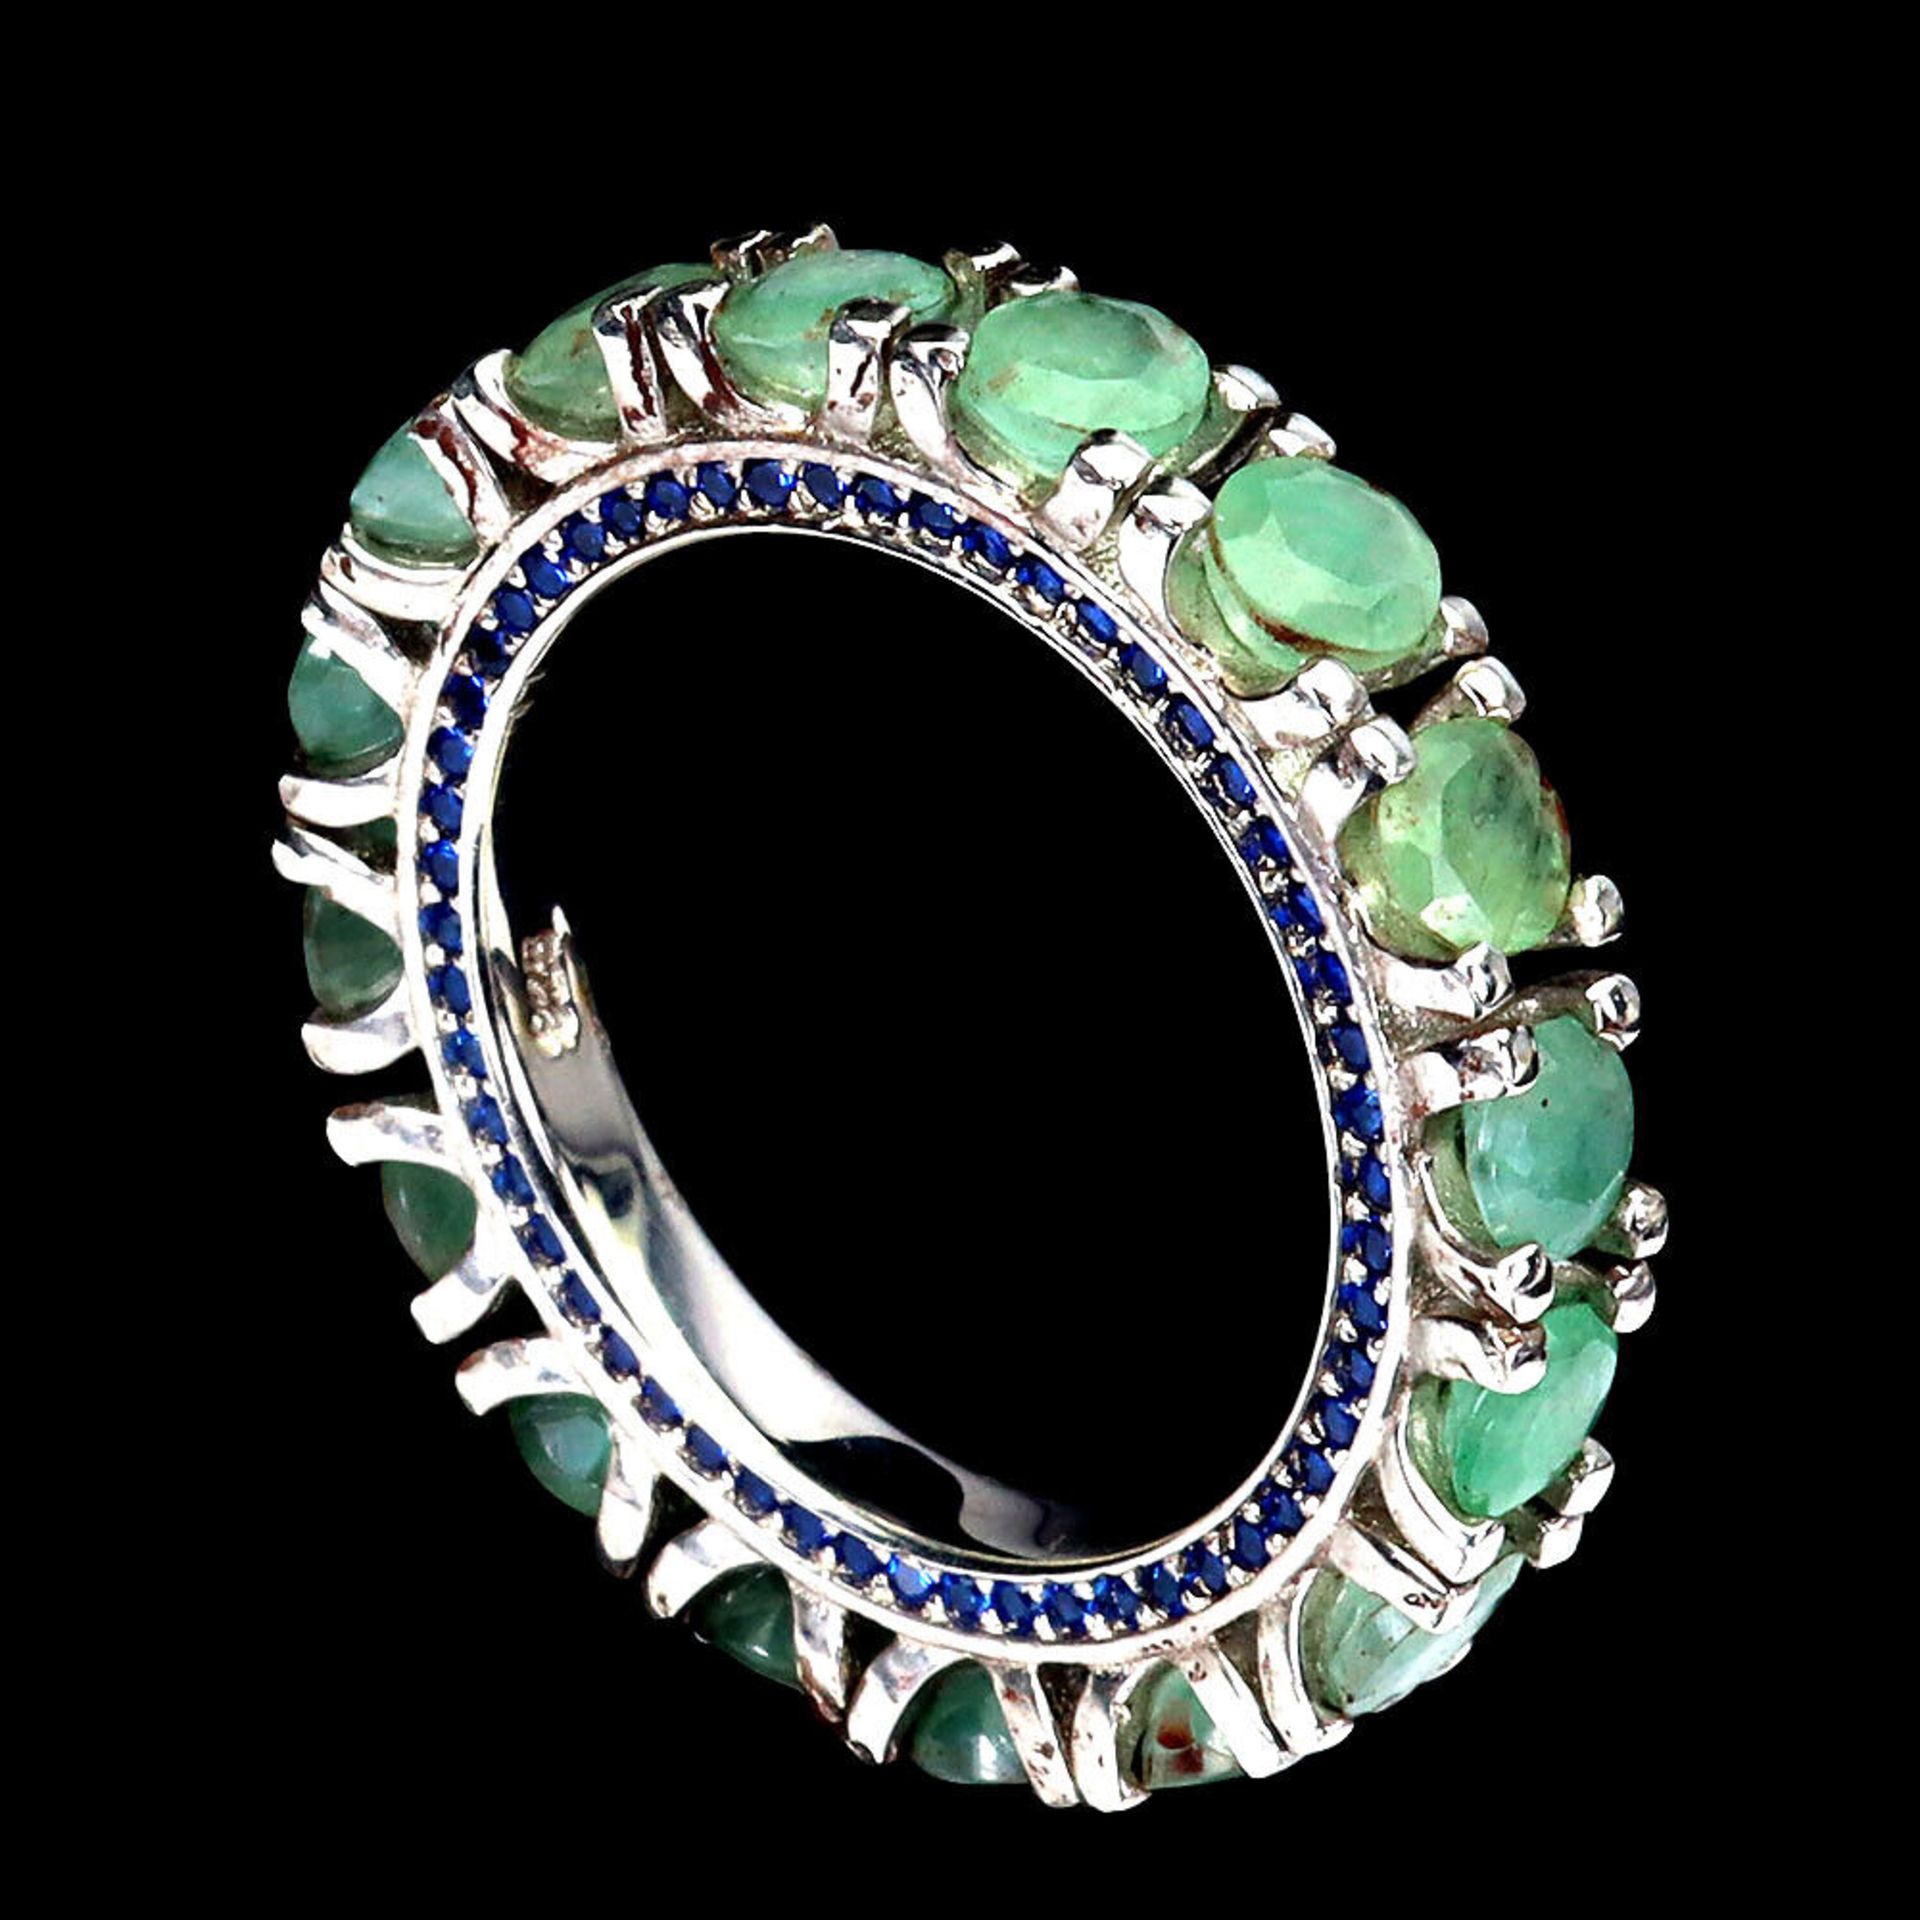 A 925 silver full eternity ring set with emeralds and sapphire set shank, ring size O.